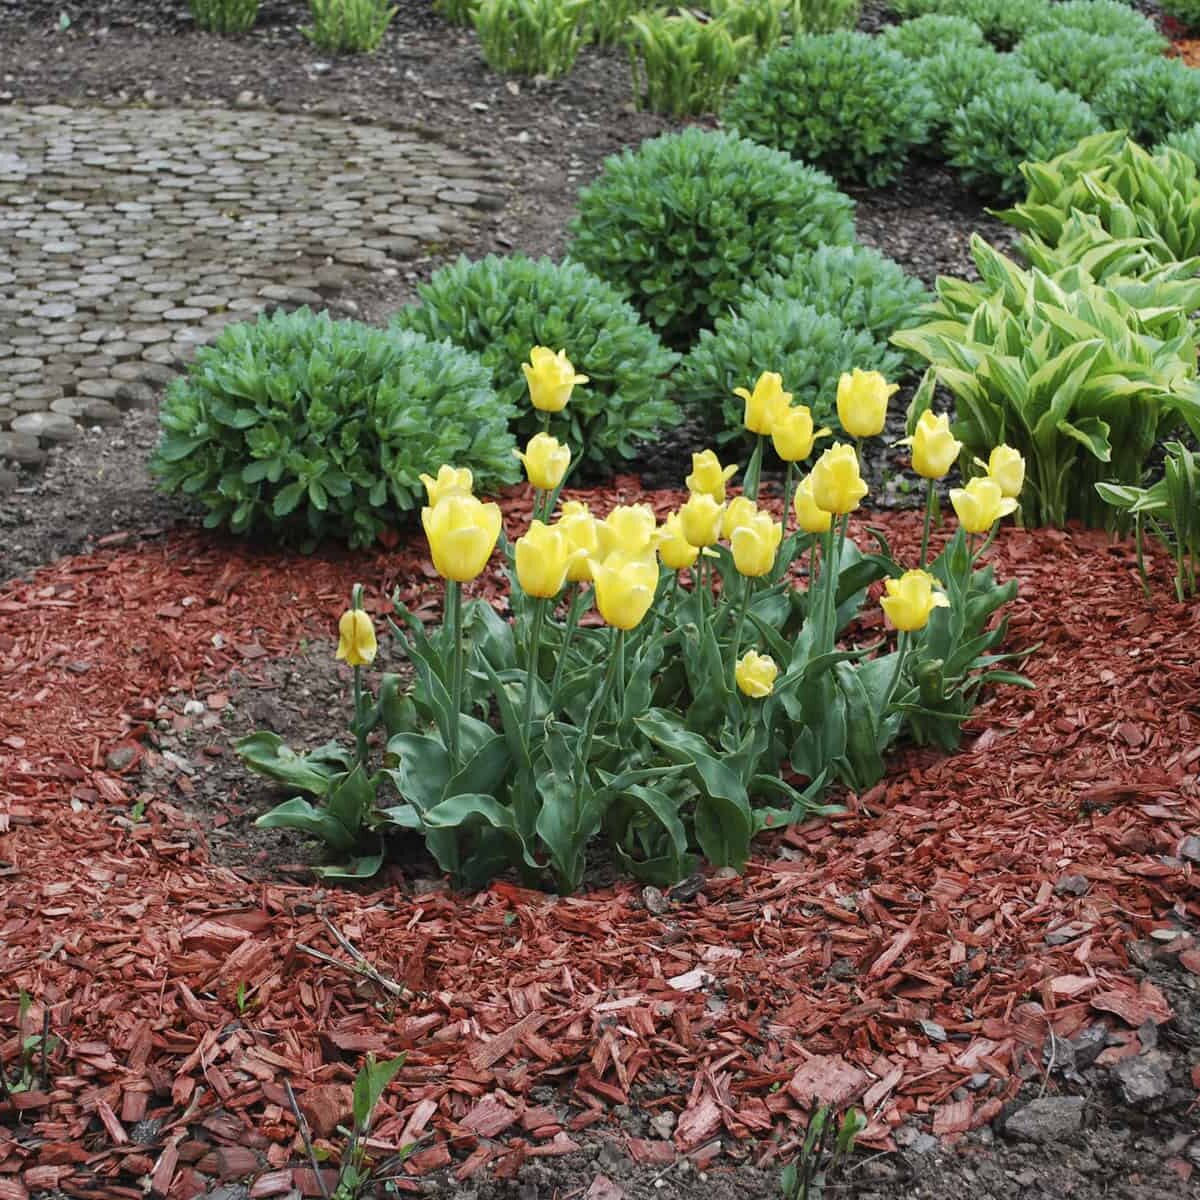 Yellow and red tulips, Sedum telephium 'Herbstfreude', Hosta sieboldiana on the flowerbed, sprinkler with red dyed mulch. Ornamental plants for landscaping.